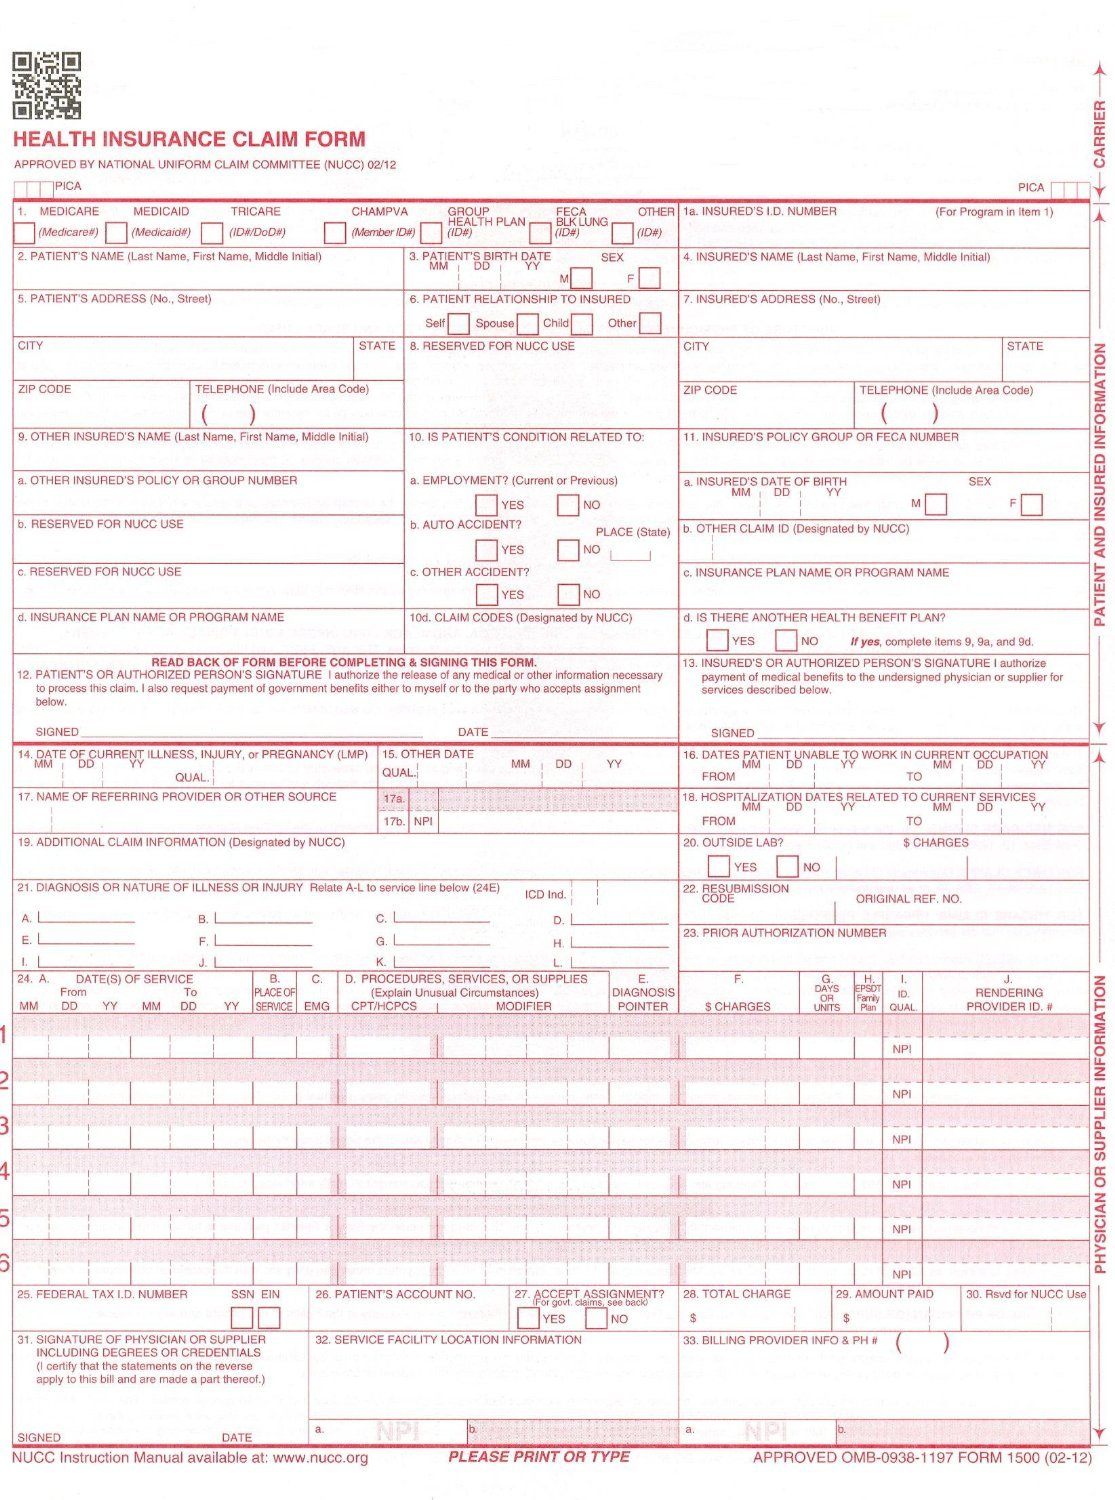 For Handwritten Use CMS 1500 HCFA 1500 Medical Billing Forms 